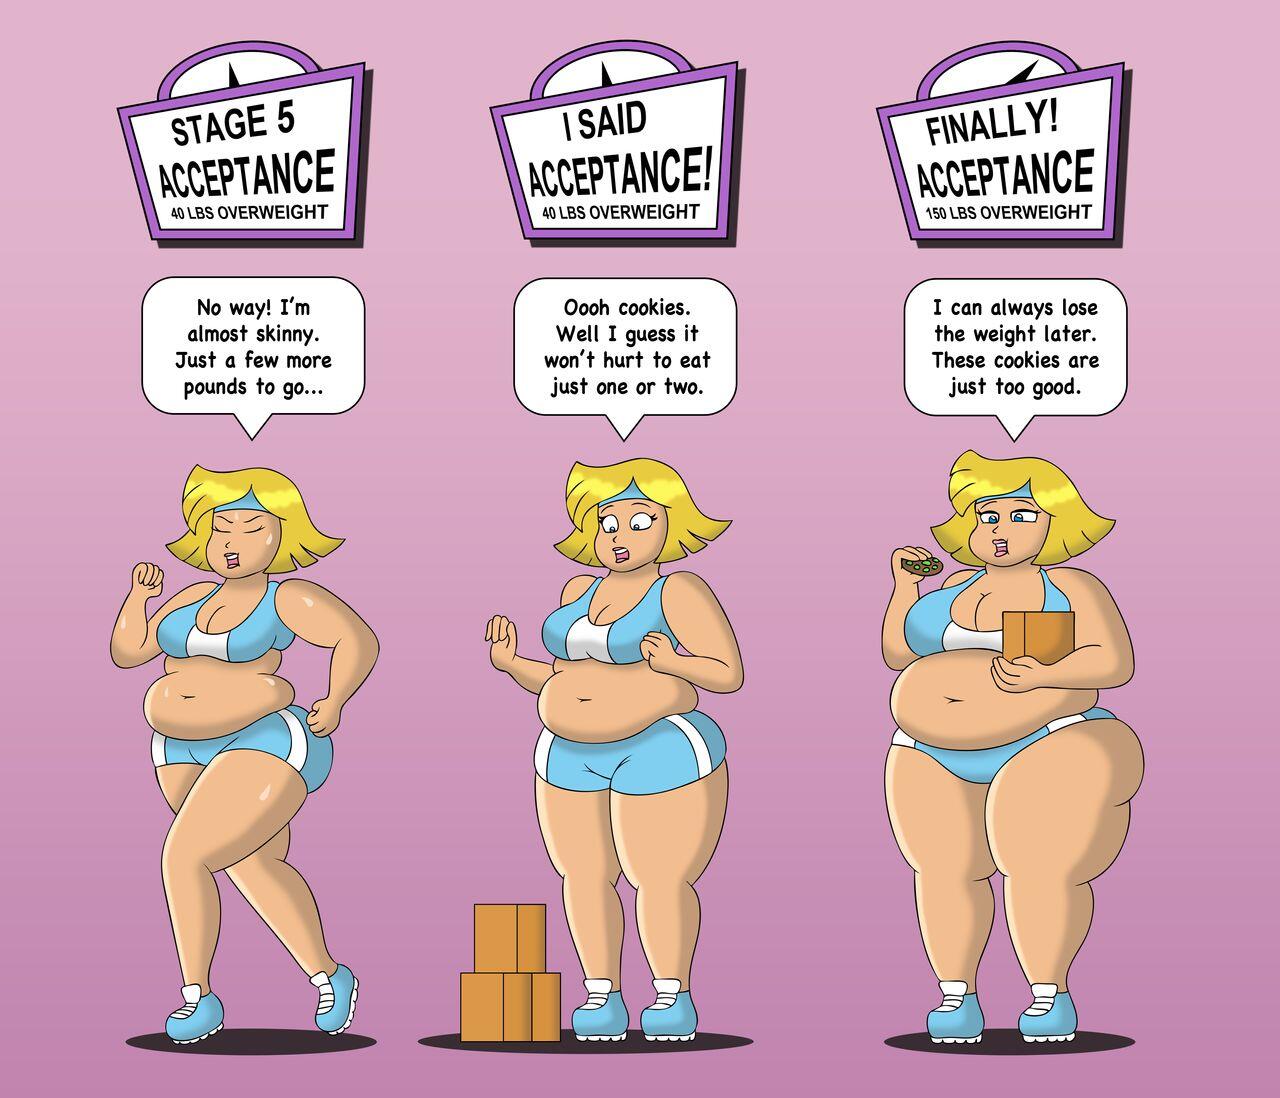 Out of all the kinks in the world mine happens to be female weight gain.